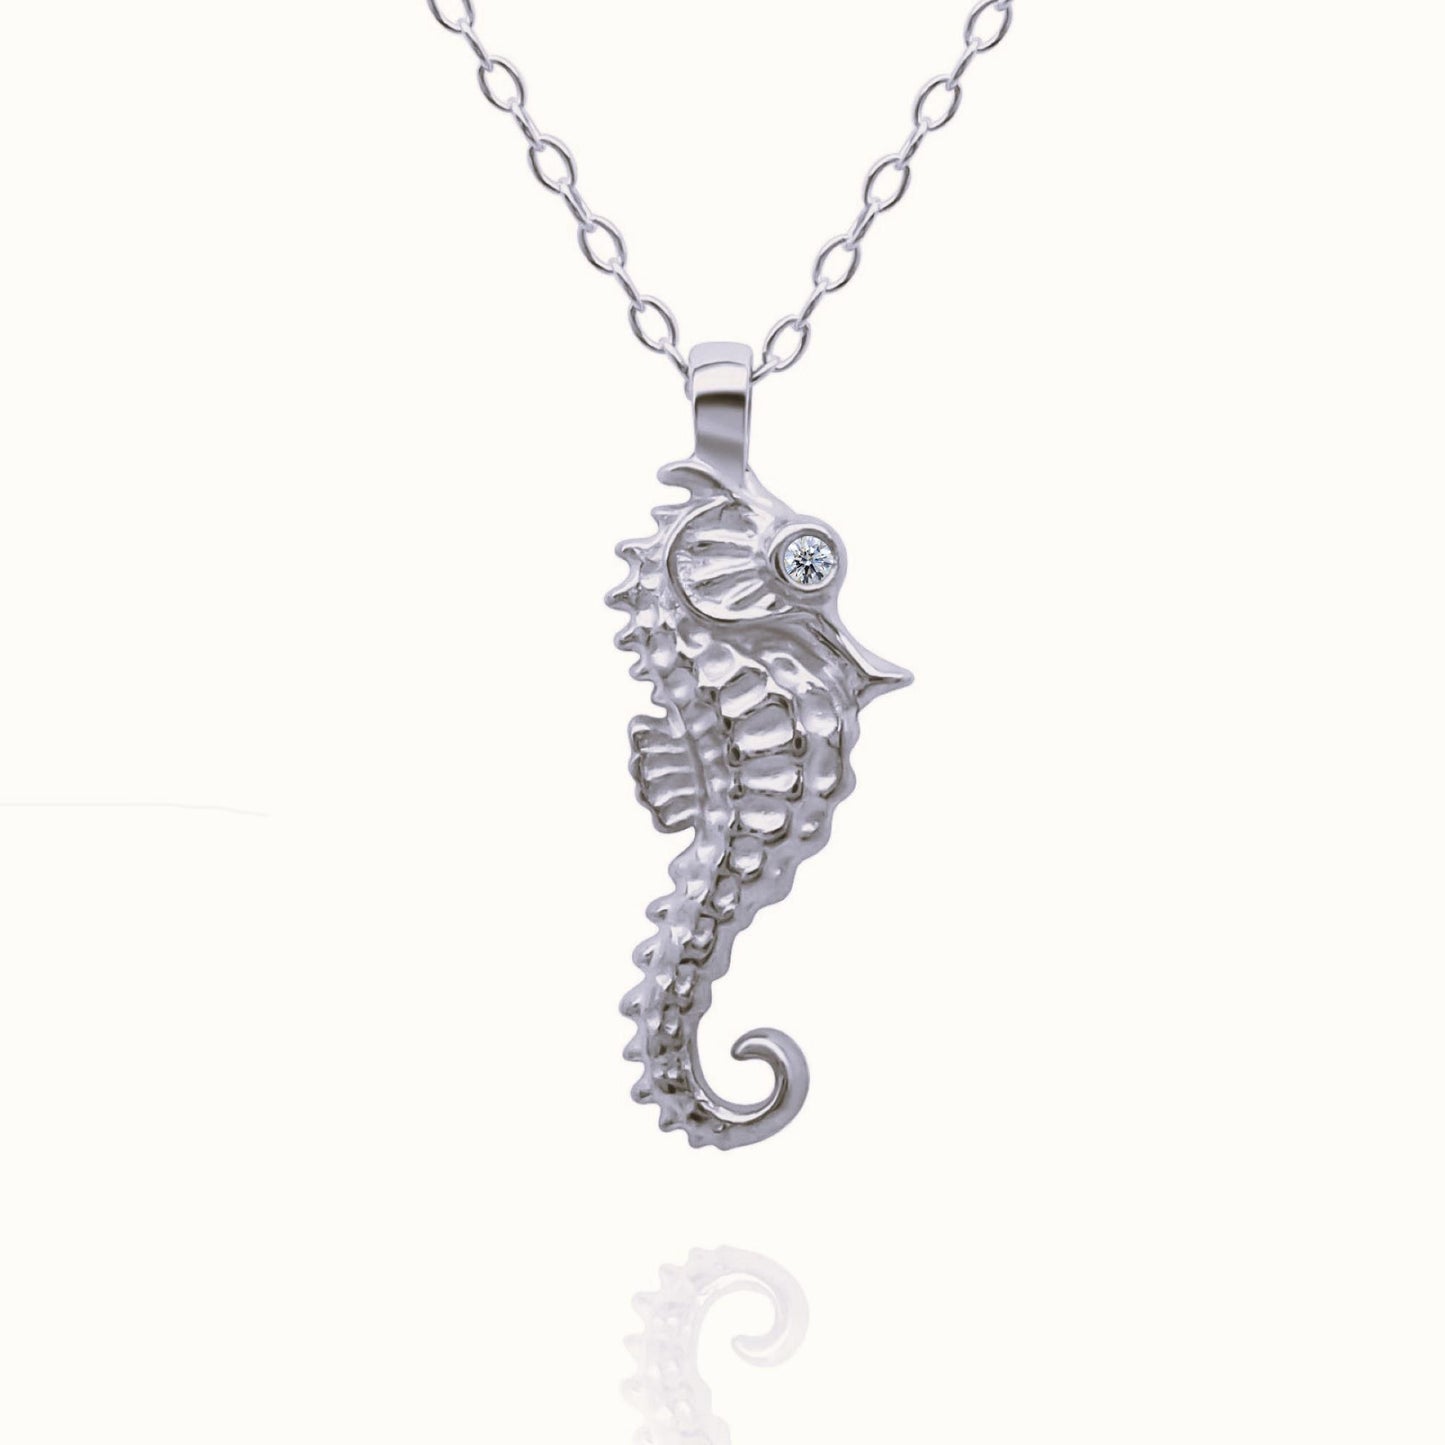 Platinum & diamond Seahorse charm with a solid platinum chain. Made to order. © Adrian Ashley